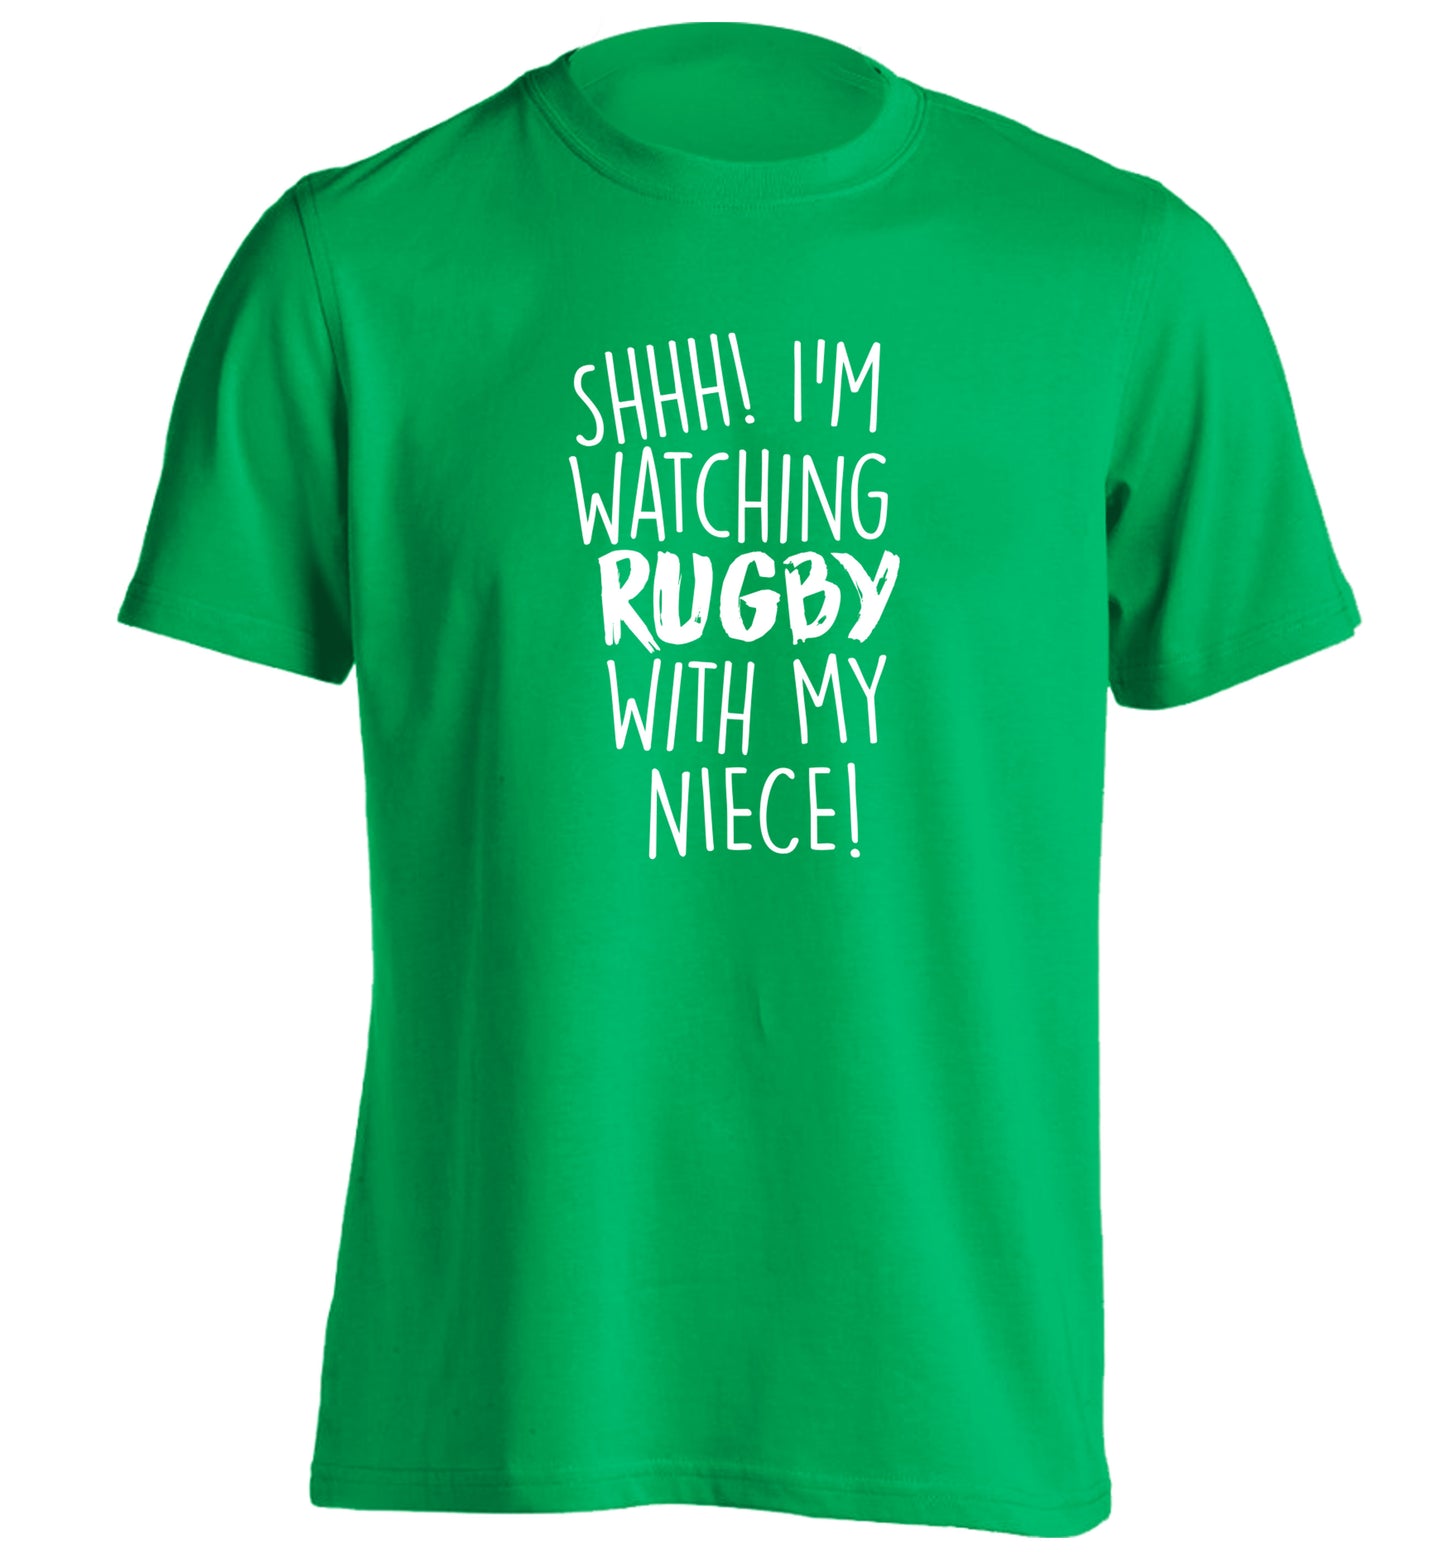 Shh.. I'm watching rugby with my niece adults unisex green Tshirt 2XL